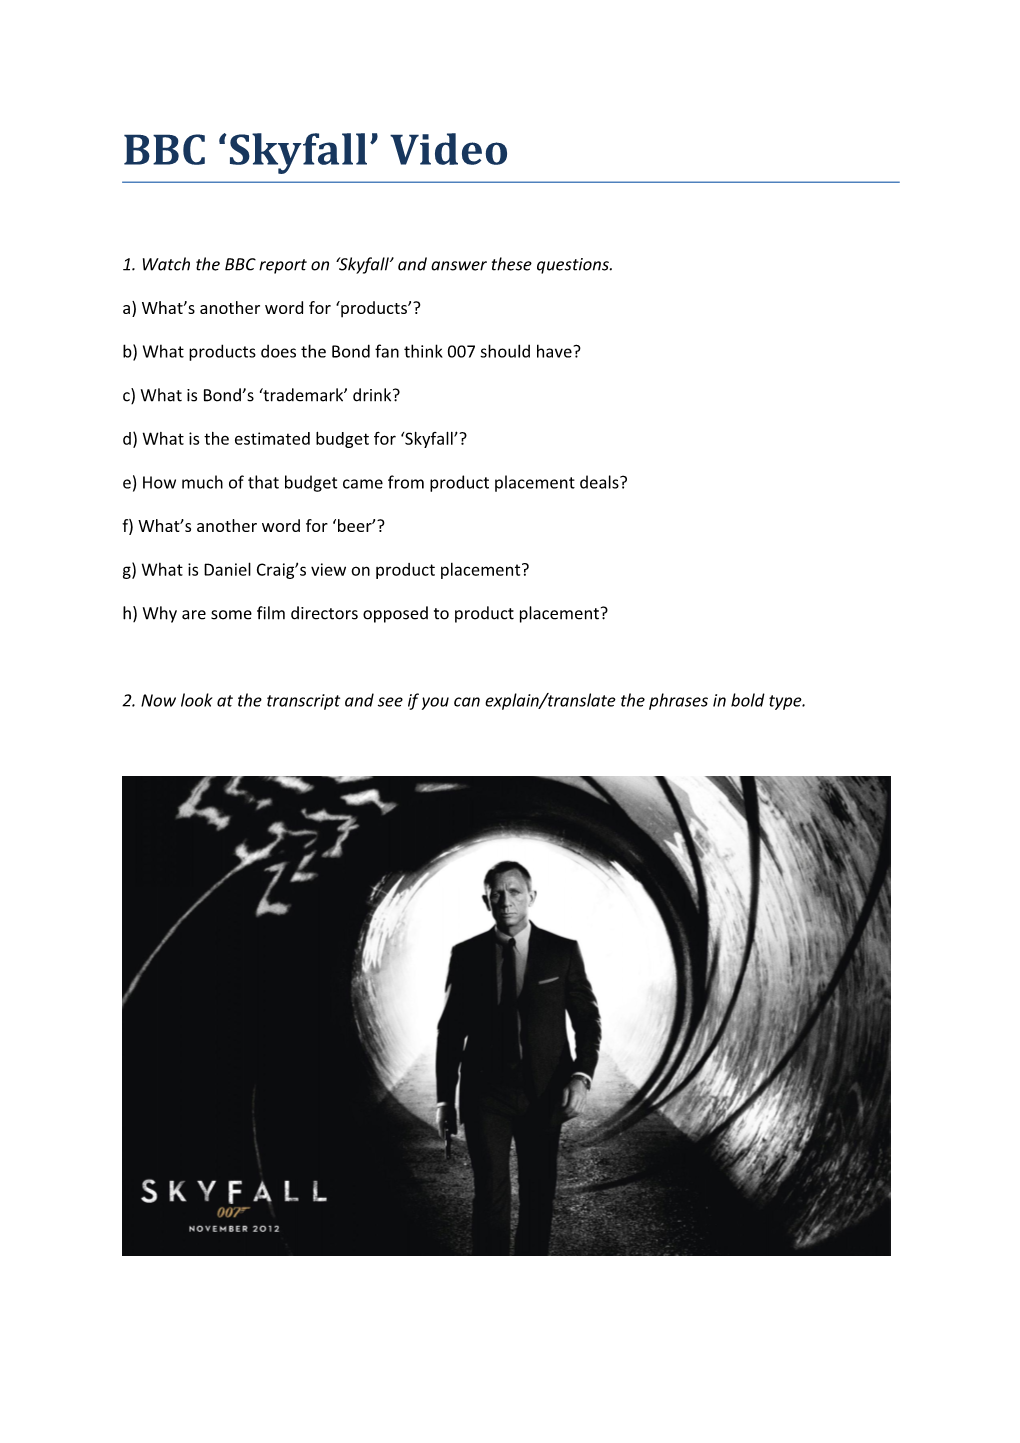 1. Watch the BBC Report on Skyfall and Answer These Questions